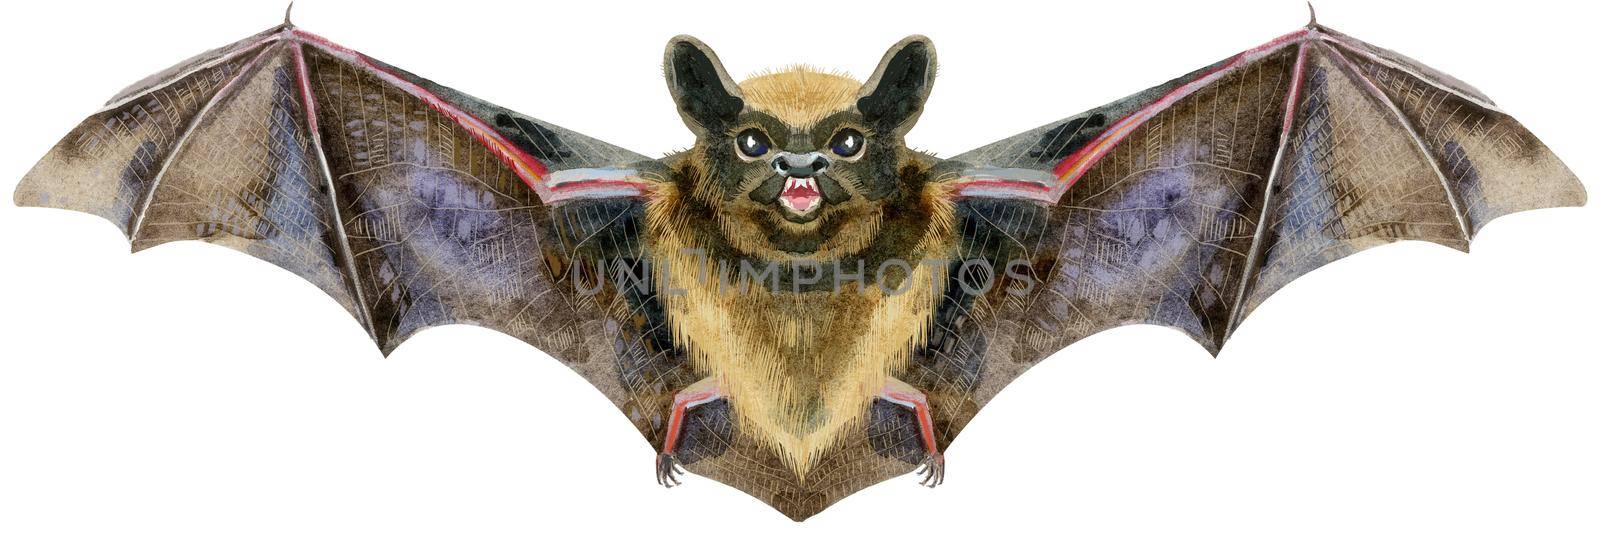 Watercolor illustration of a bat in white background. by NataOmsk